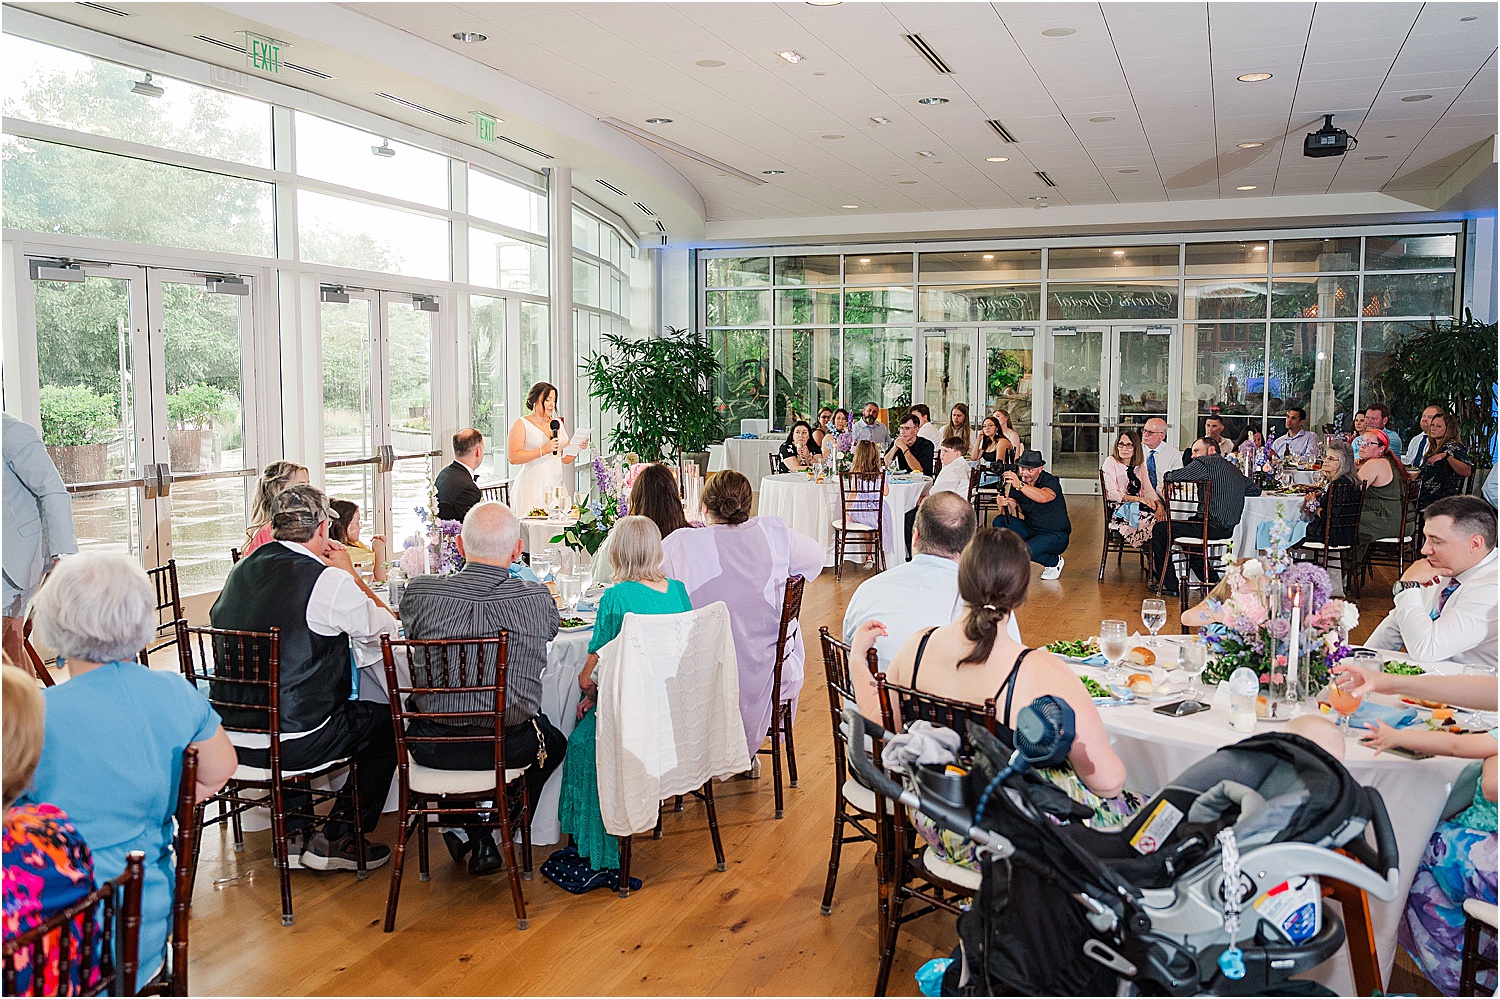 Bride giving speech at wedding in Sarris Special Events Halls Phipps Conservatory • Wild Weather - Love at a Phipps Conservatory Outdoor Garden Wedding